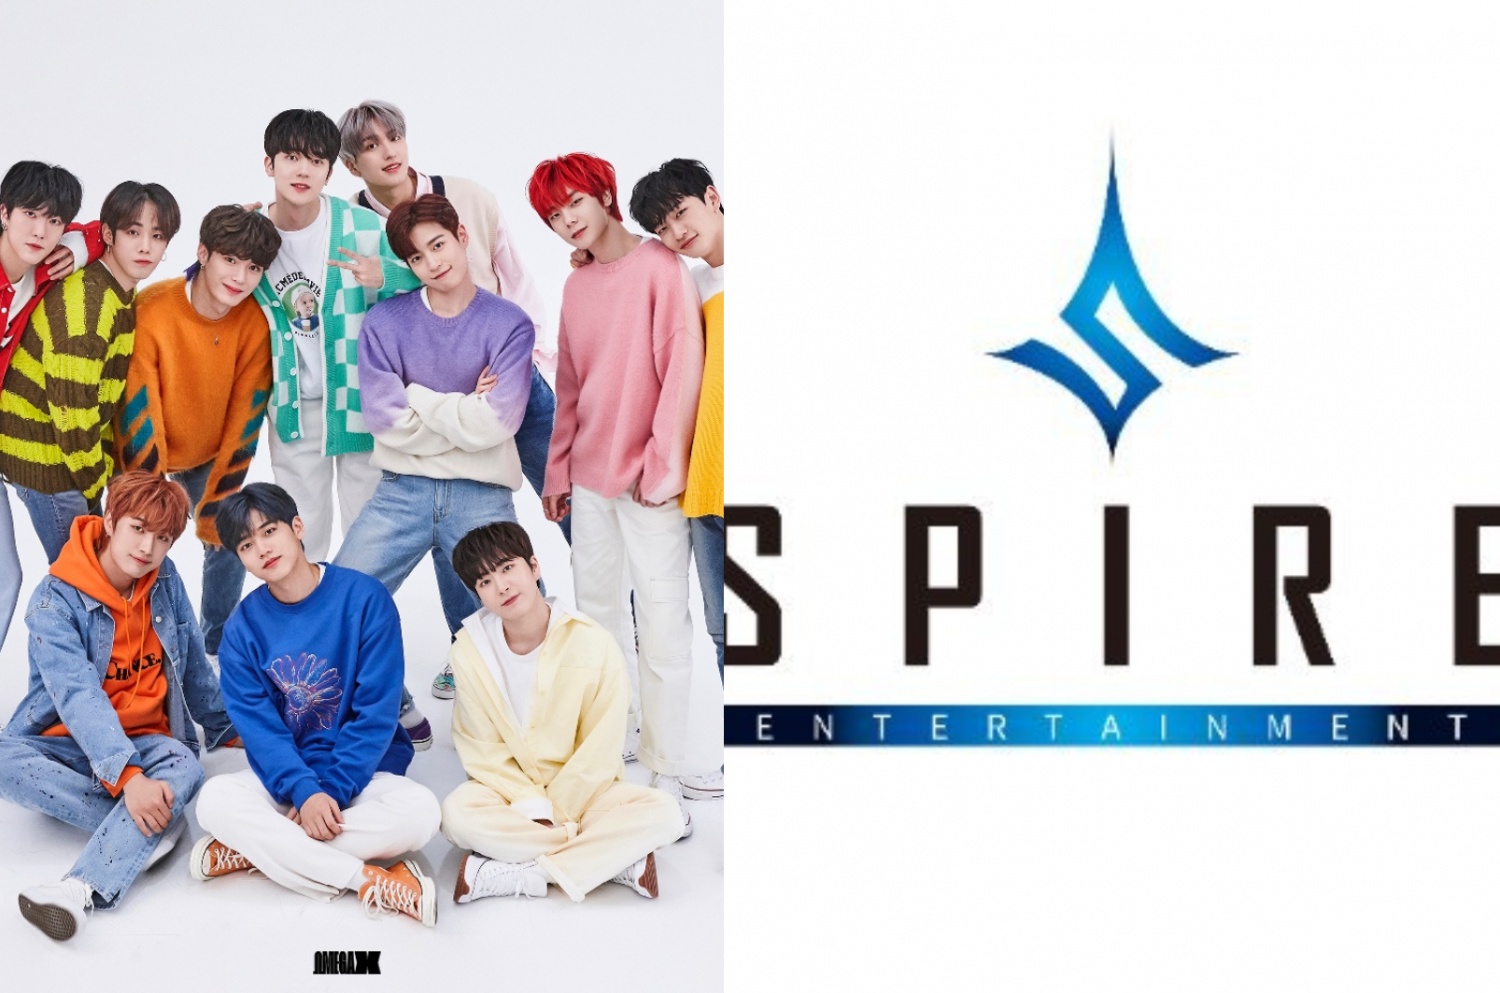 OMEGA X claims to have experienced sexual harassment from the former CEO of Spire Entertainment